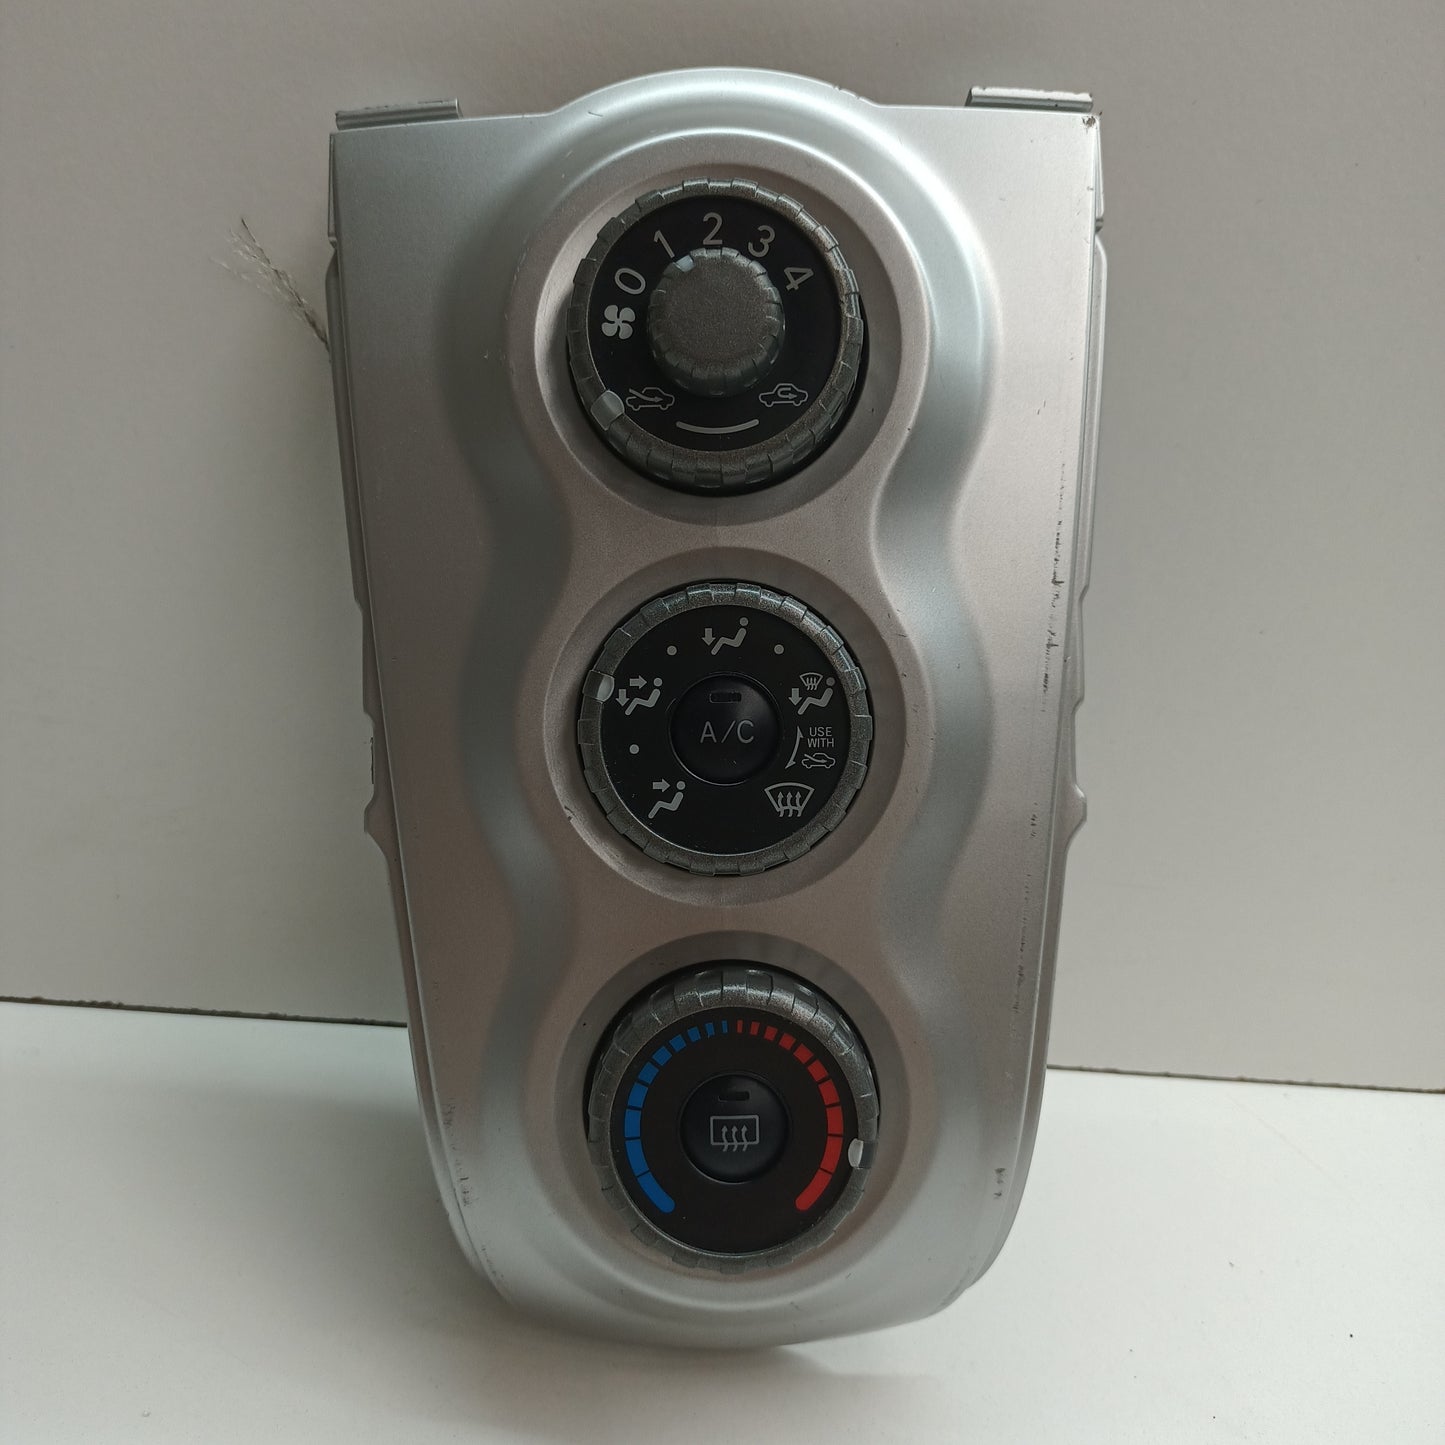 Toyota Yaris Hatchback Air Conditioning Controls 2005 2006 2007 2008 2009 2010